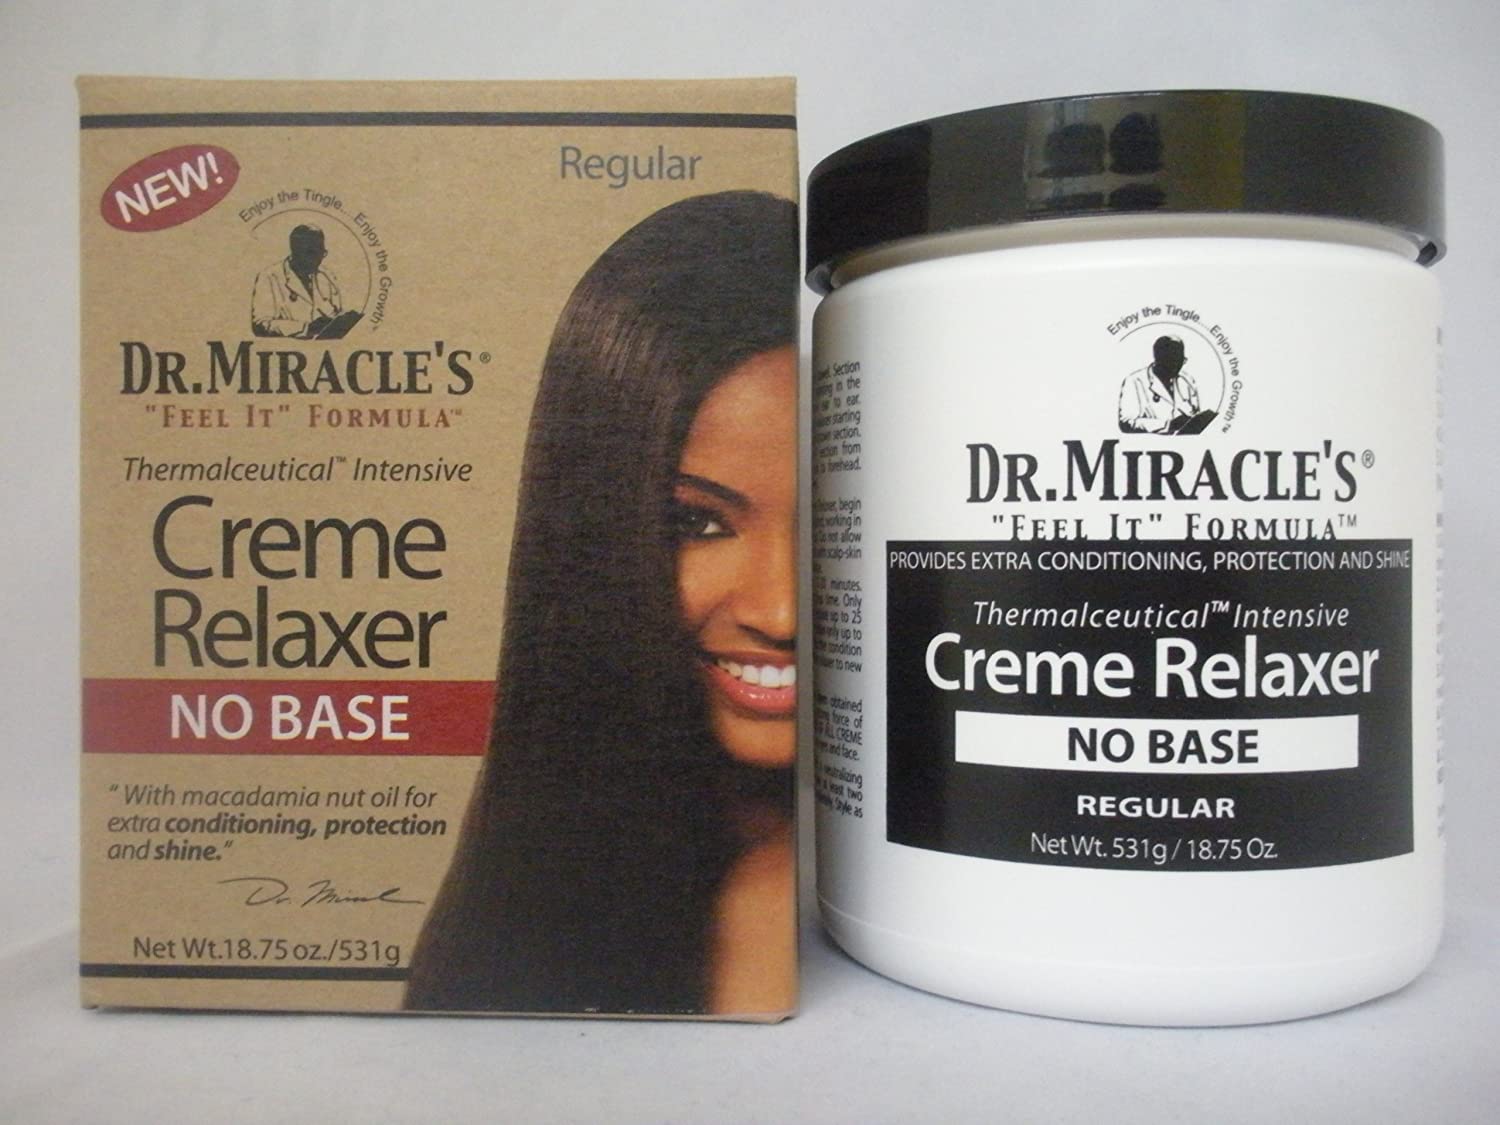 Dr. Miracle's Creme Relaxer